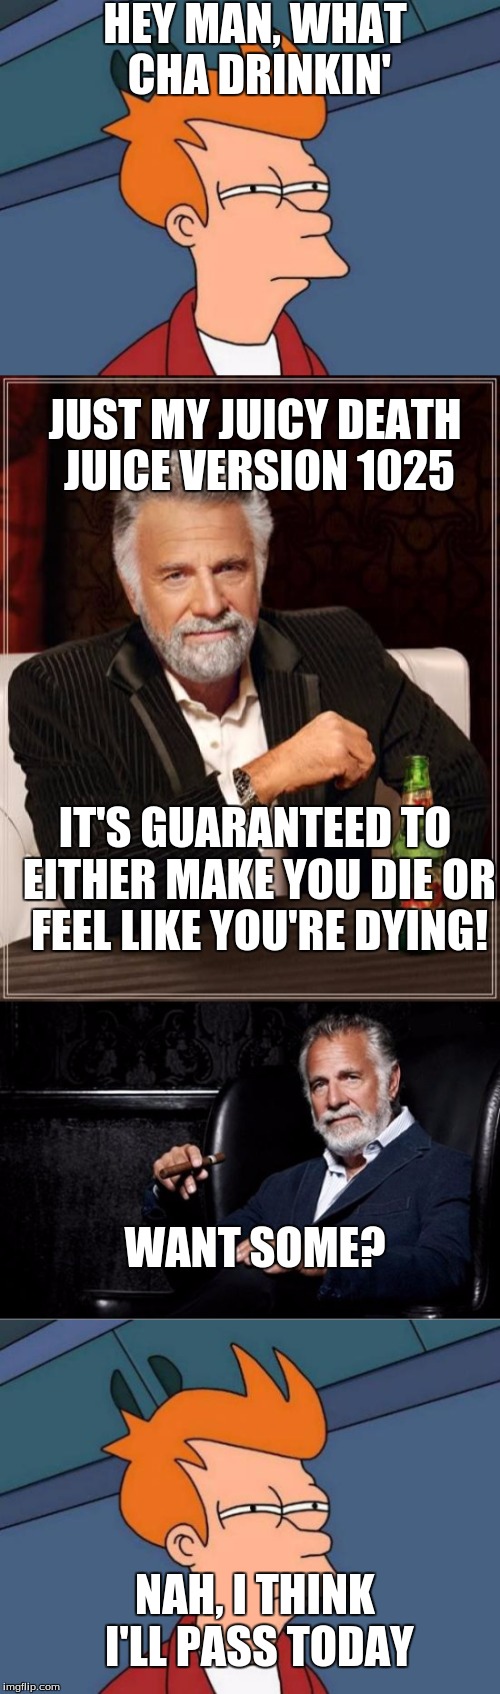 How To Become Your Favorite Memer 5: Juicydeath1025  | HEY MAN, WHAT CHA DRINKIN'; JUST MY JUICY DEATH JUICE VERSION 1025; IT'S GUARANTEED TO EITHER MAKE YOU DIE OR FEEL LIKE YOU'RE DYING! WANT SOME? NAH, I THINK I'LL PASS TODAY | image tagged in the most interesting man in the world,futurama fry,how to become your favorite memer,juicydeath1025,juice,memes | made w/ Imgflip meme maker